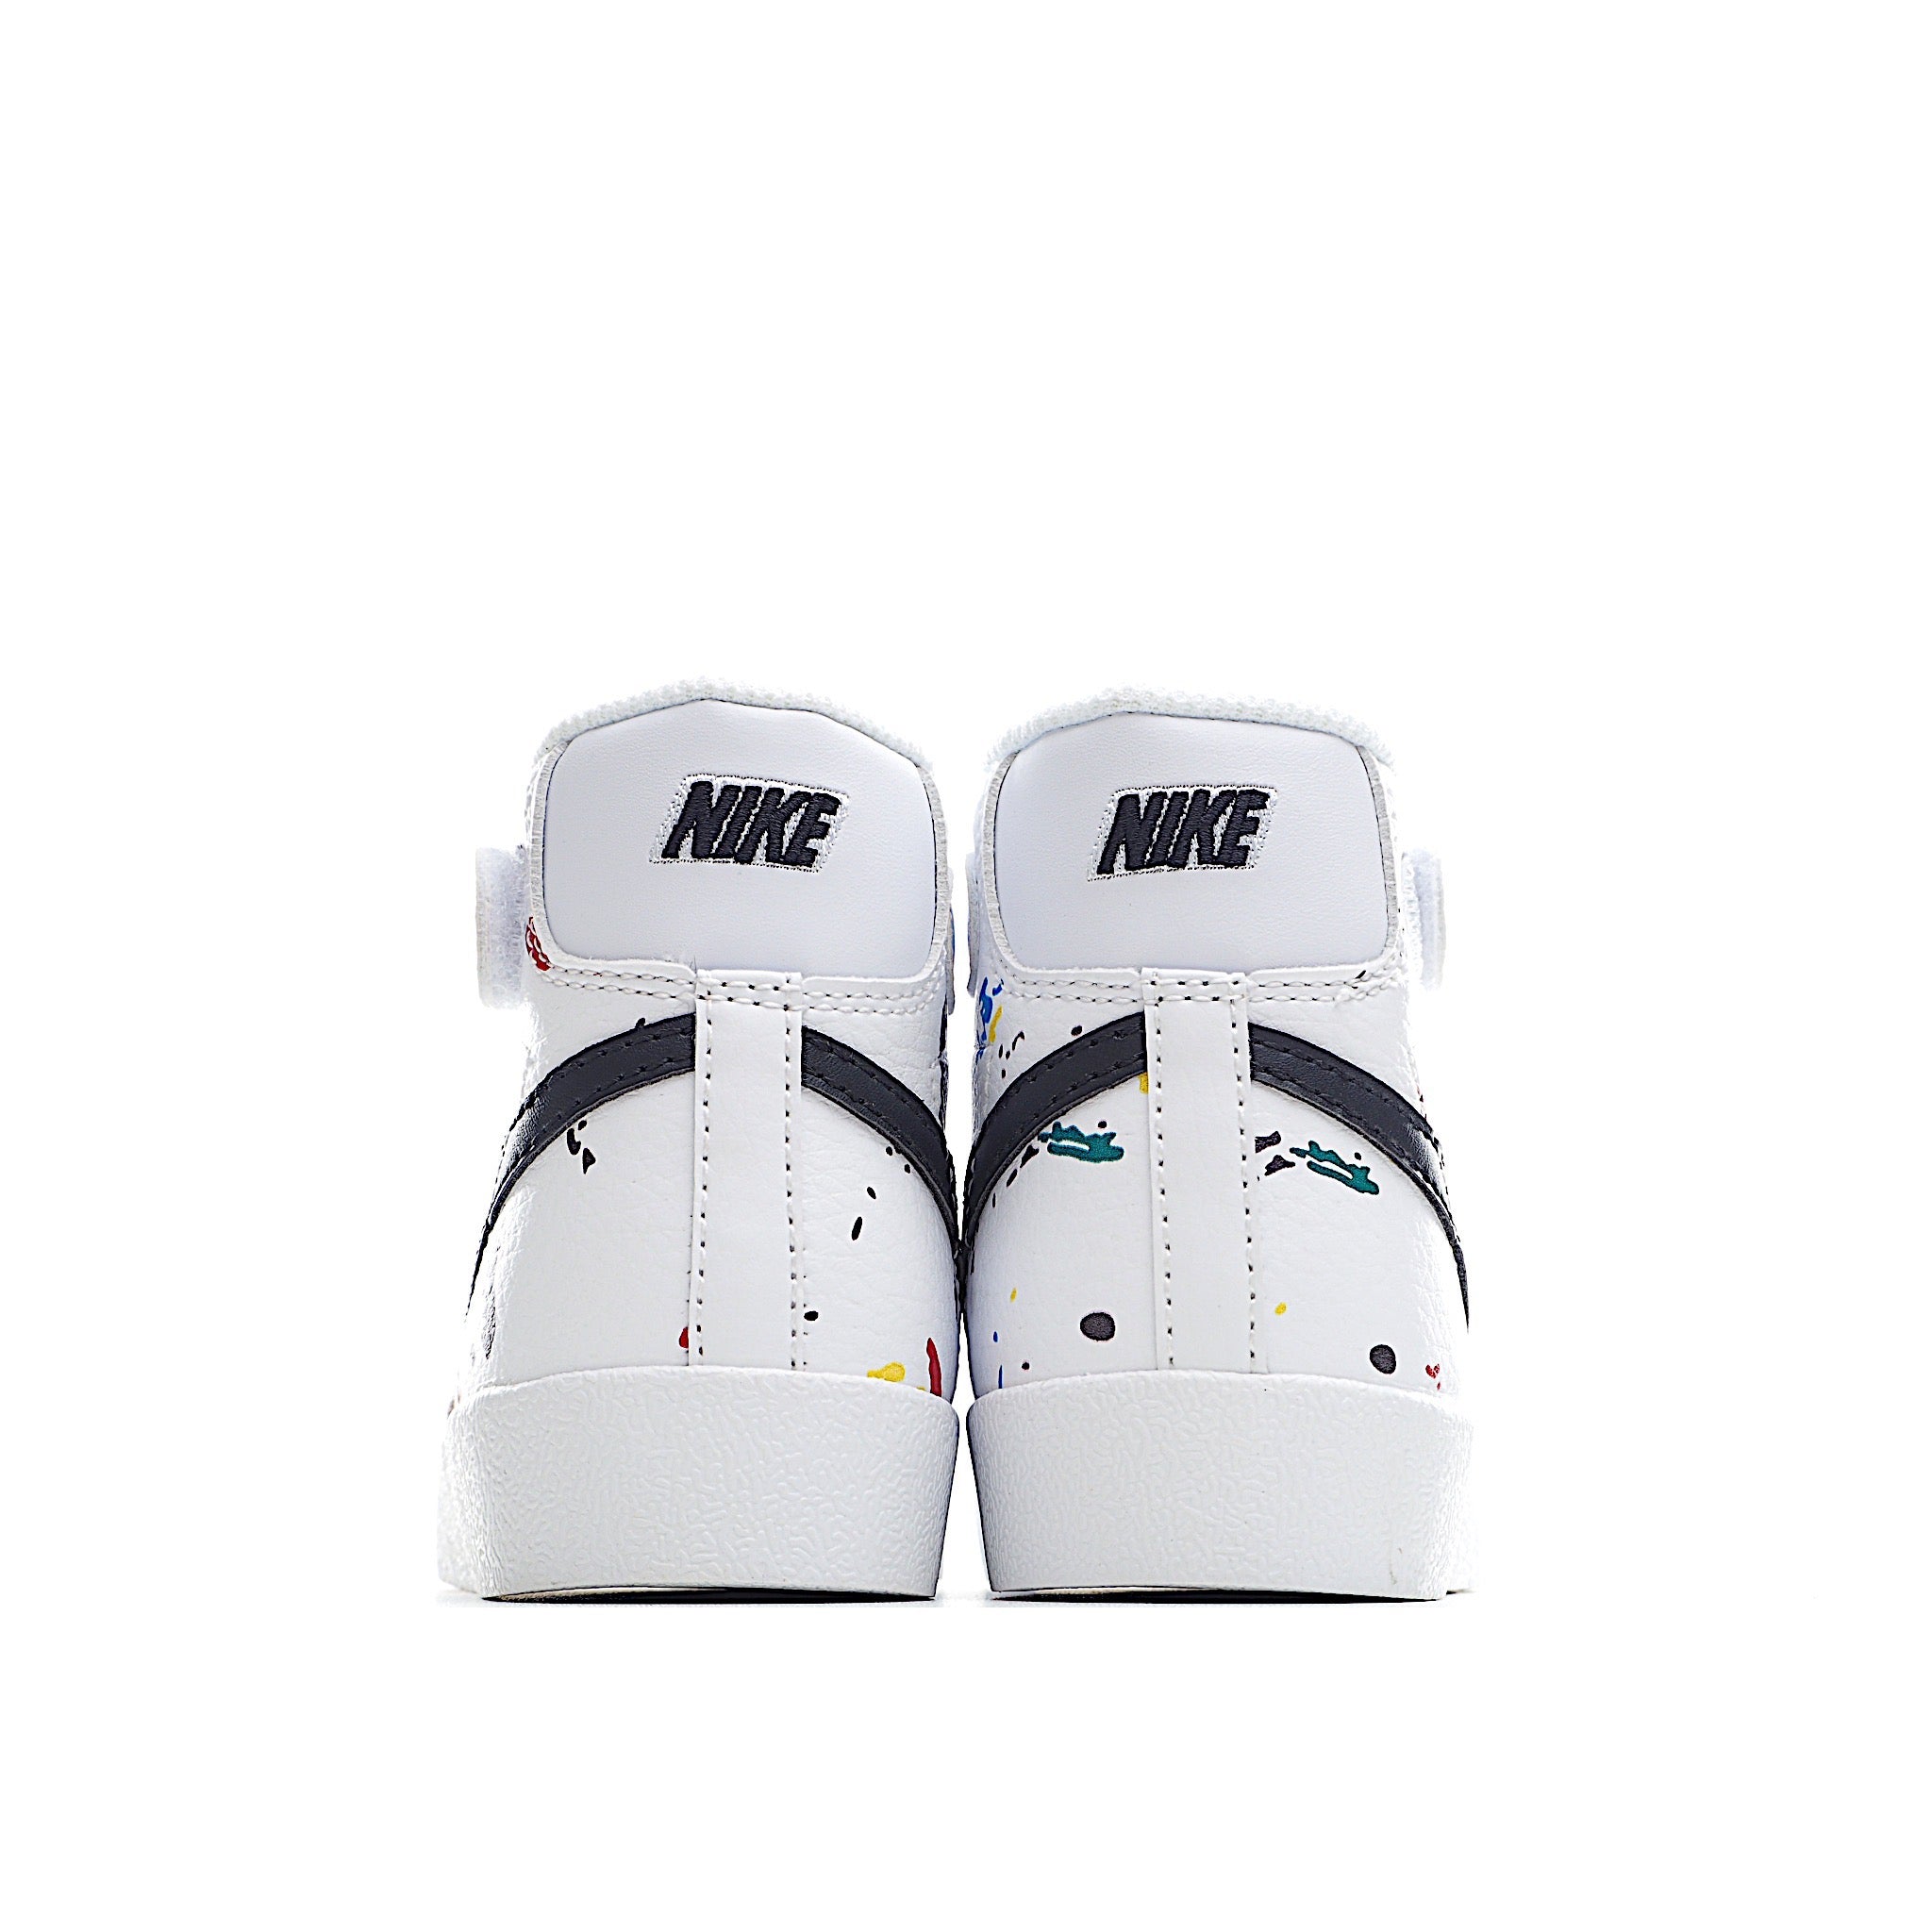 Nike high blazer color patches shoes